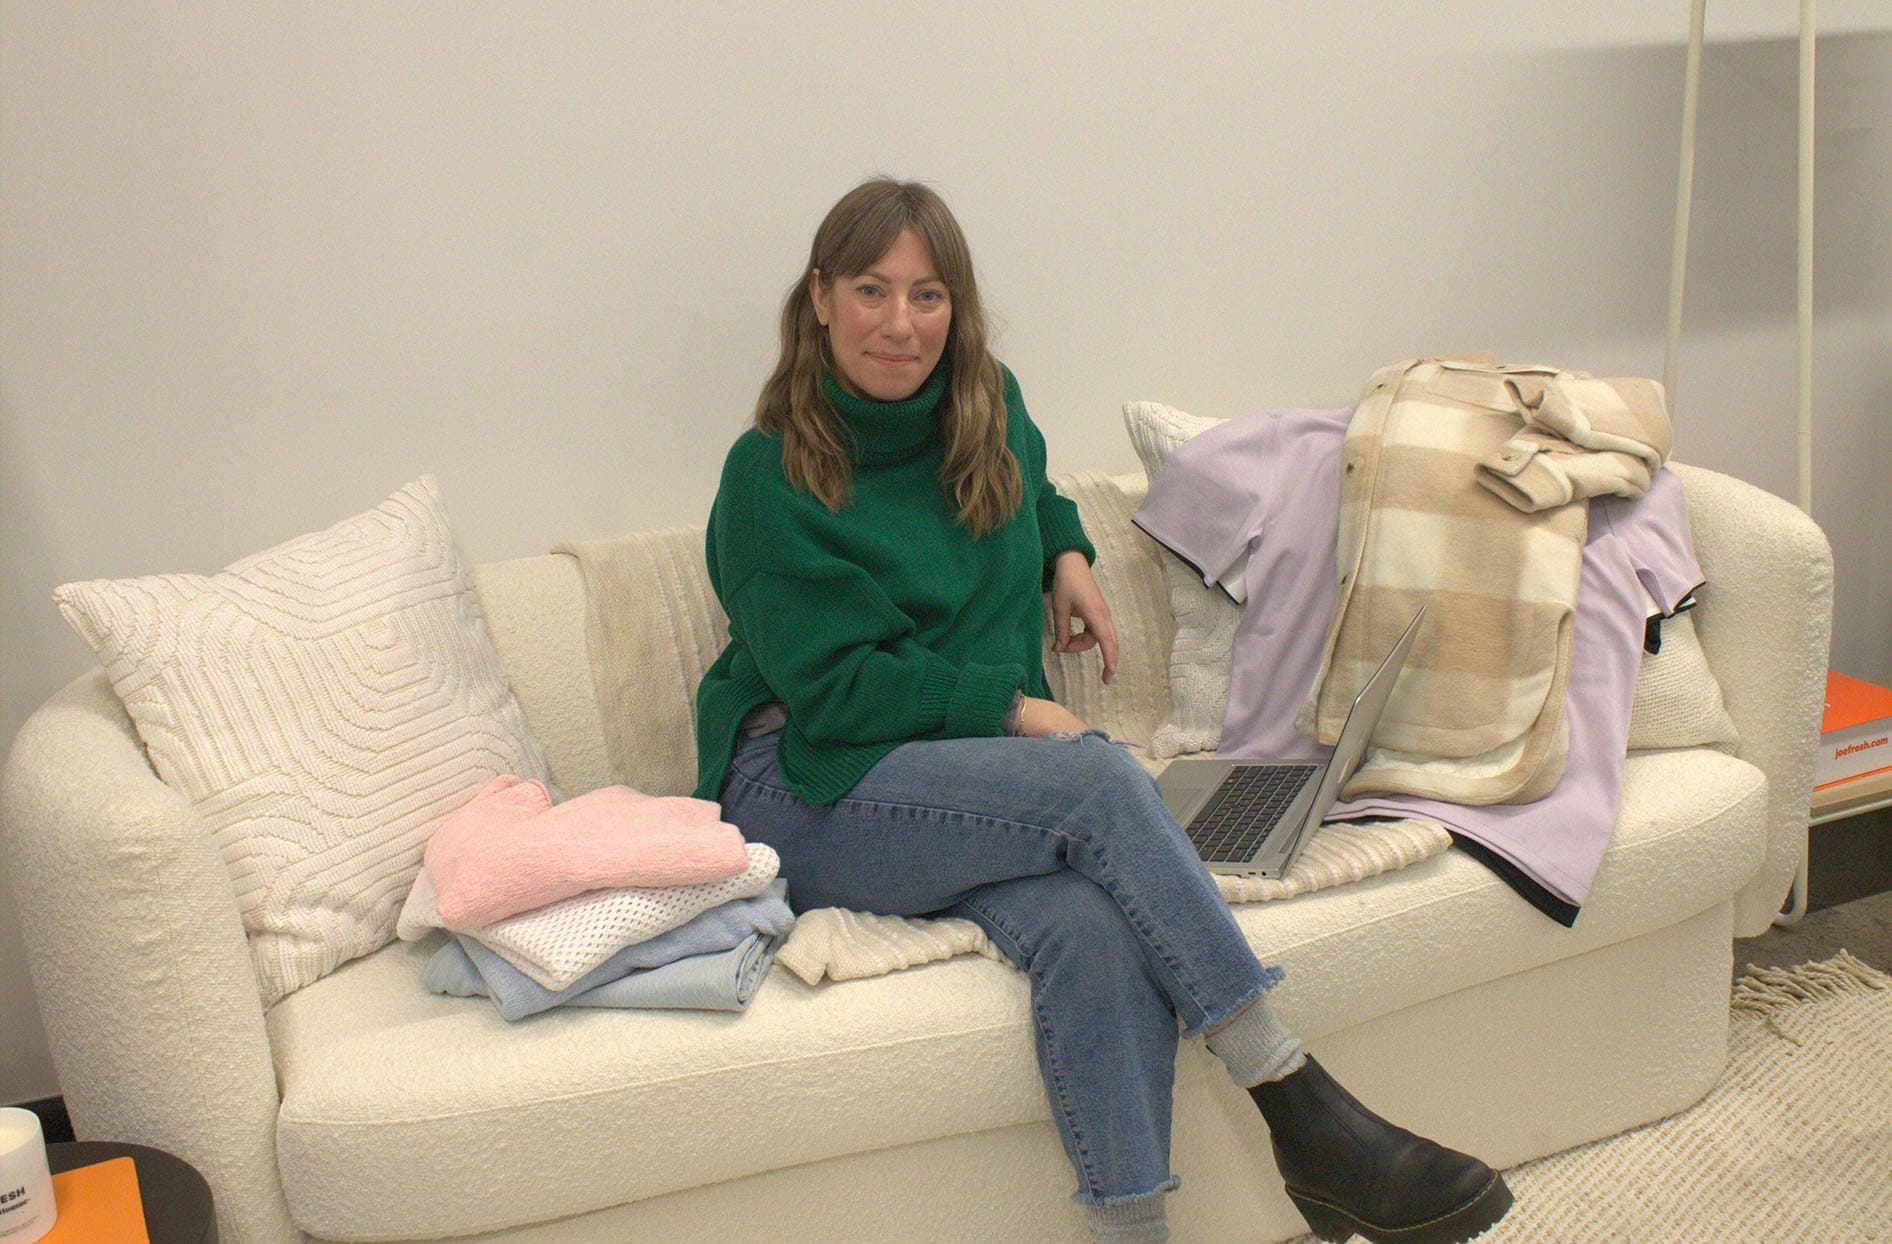 Melissa sits on a couch inside the Joe Fresh office with her laptop on her lap and clothing samples next to her. 